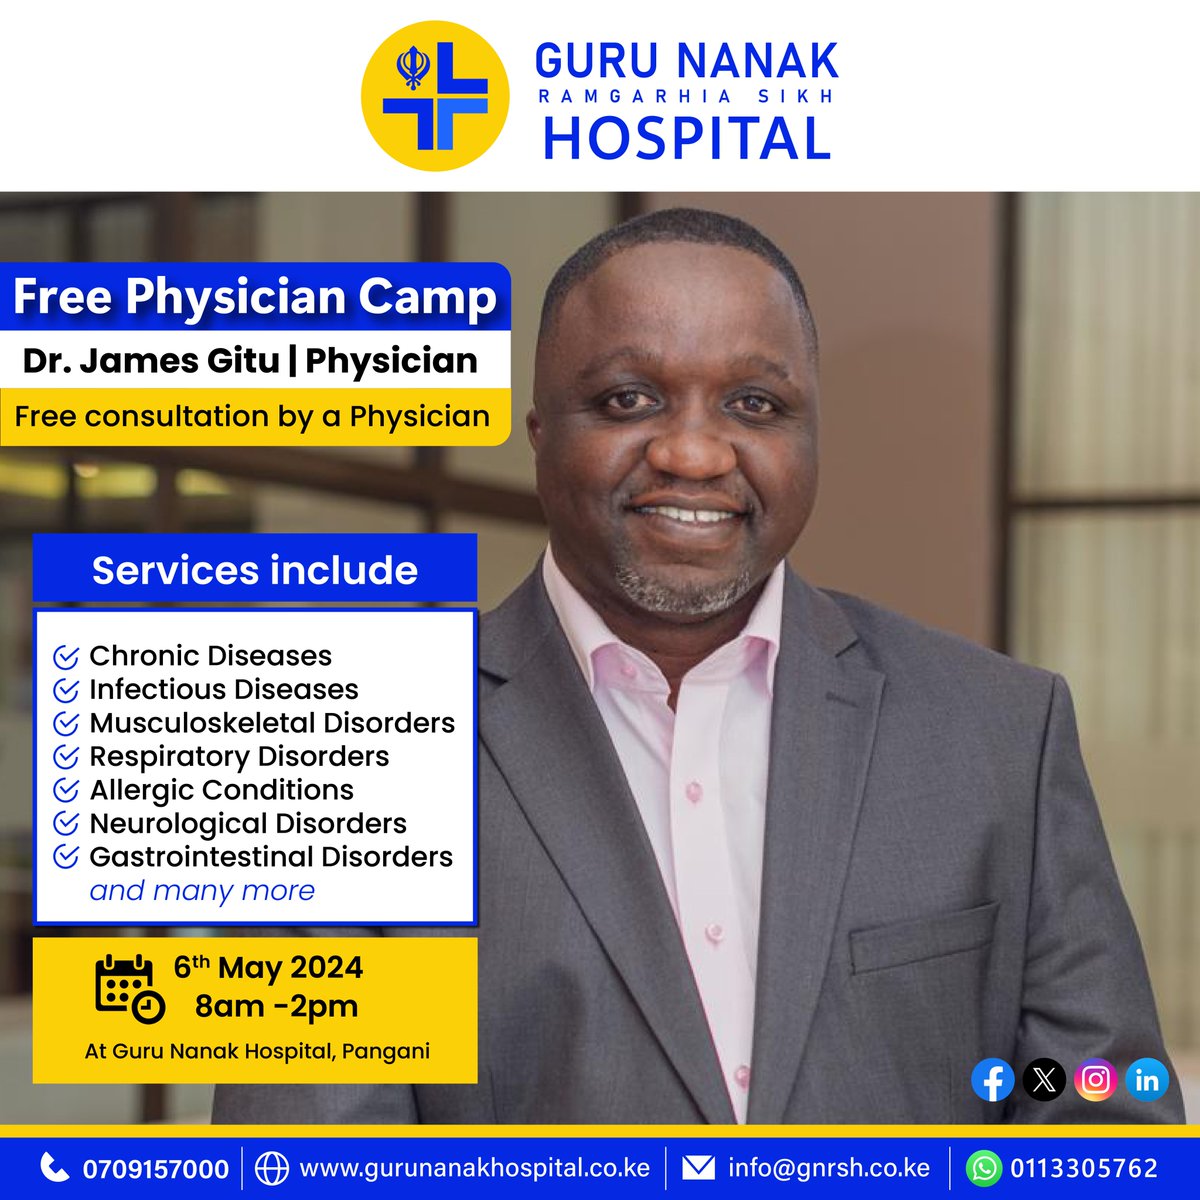 Save the date! This Monday, May 6th, 2024, come to our physician camp for complimentary consultations with Dr. Gitu. Take a proactive step towards better health! #PhysicianCamp #FreeConsultation #HealthcareForAll #WellnessEvent #DrGitu #CommunityHealth #HealthyLiving